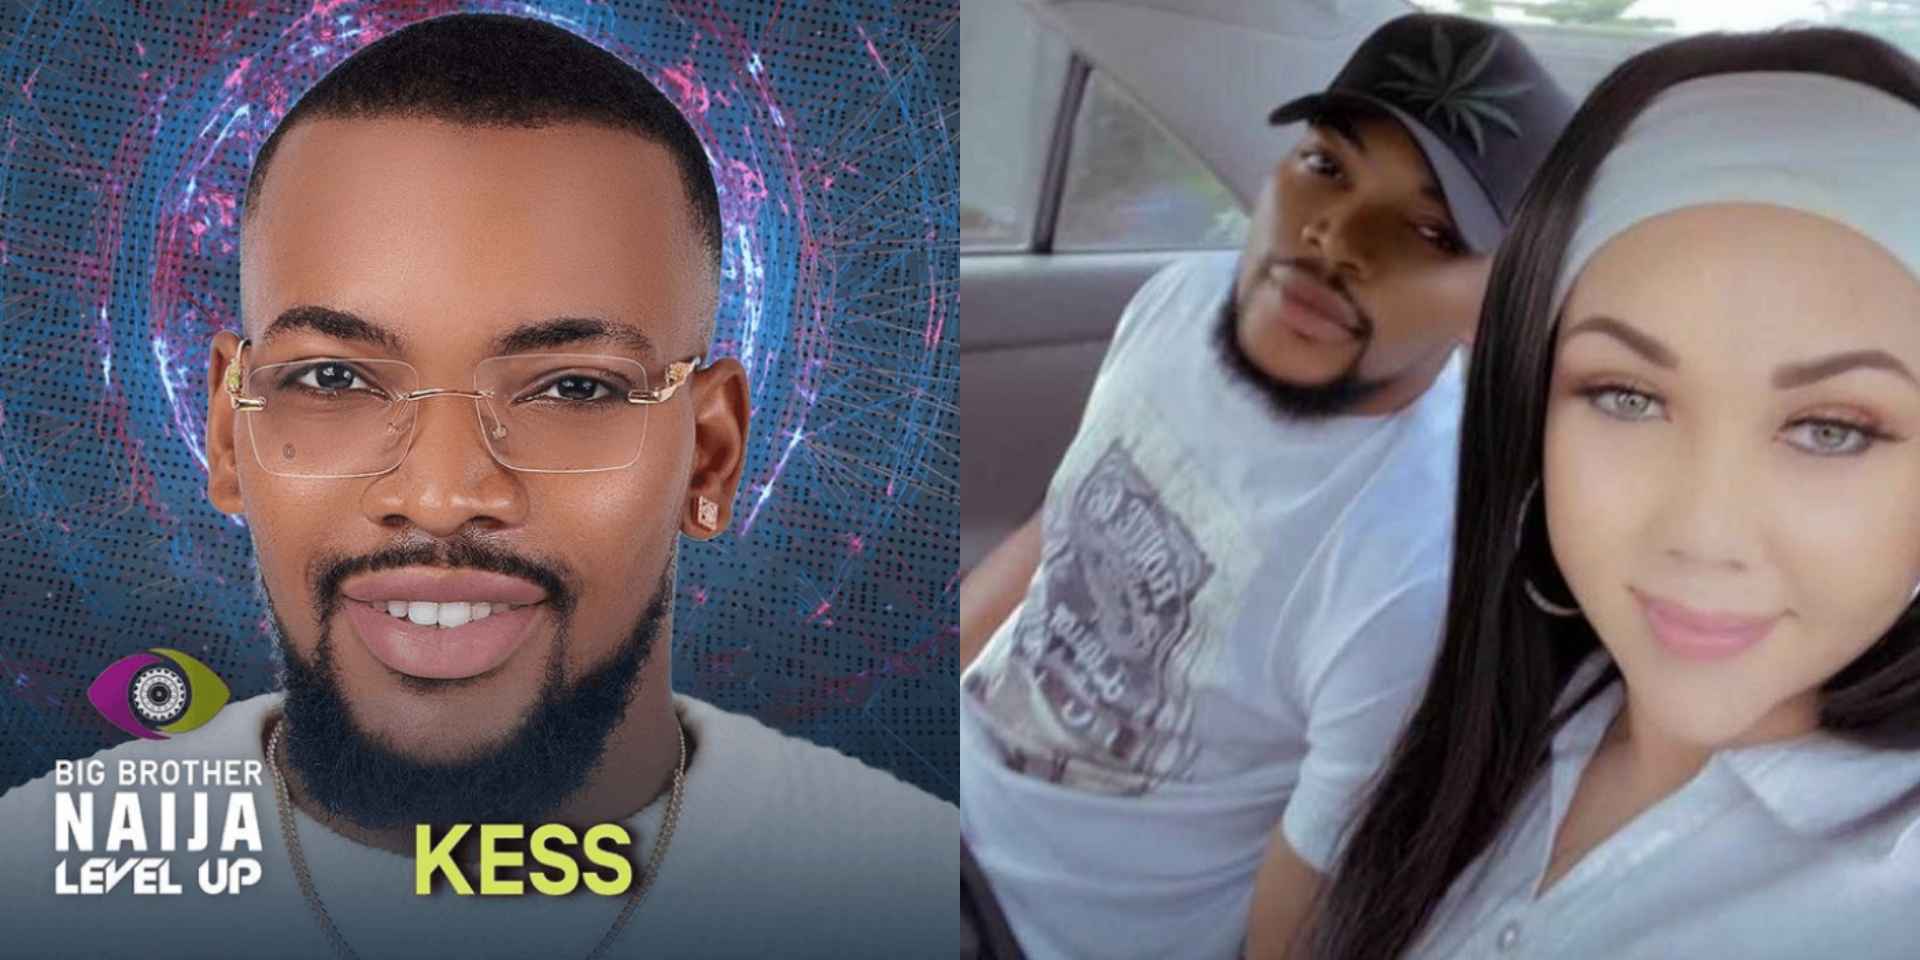 BBNaija: Married housemate, Kess reportedly loses son while in the show